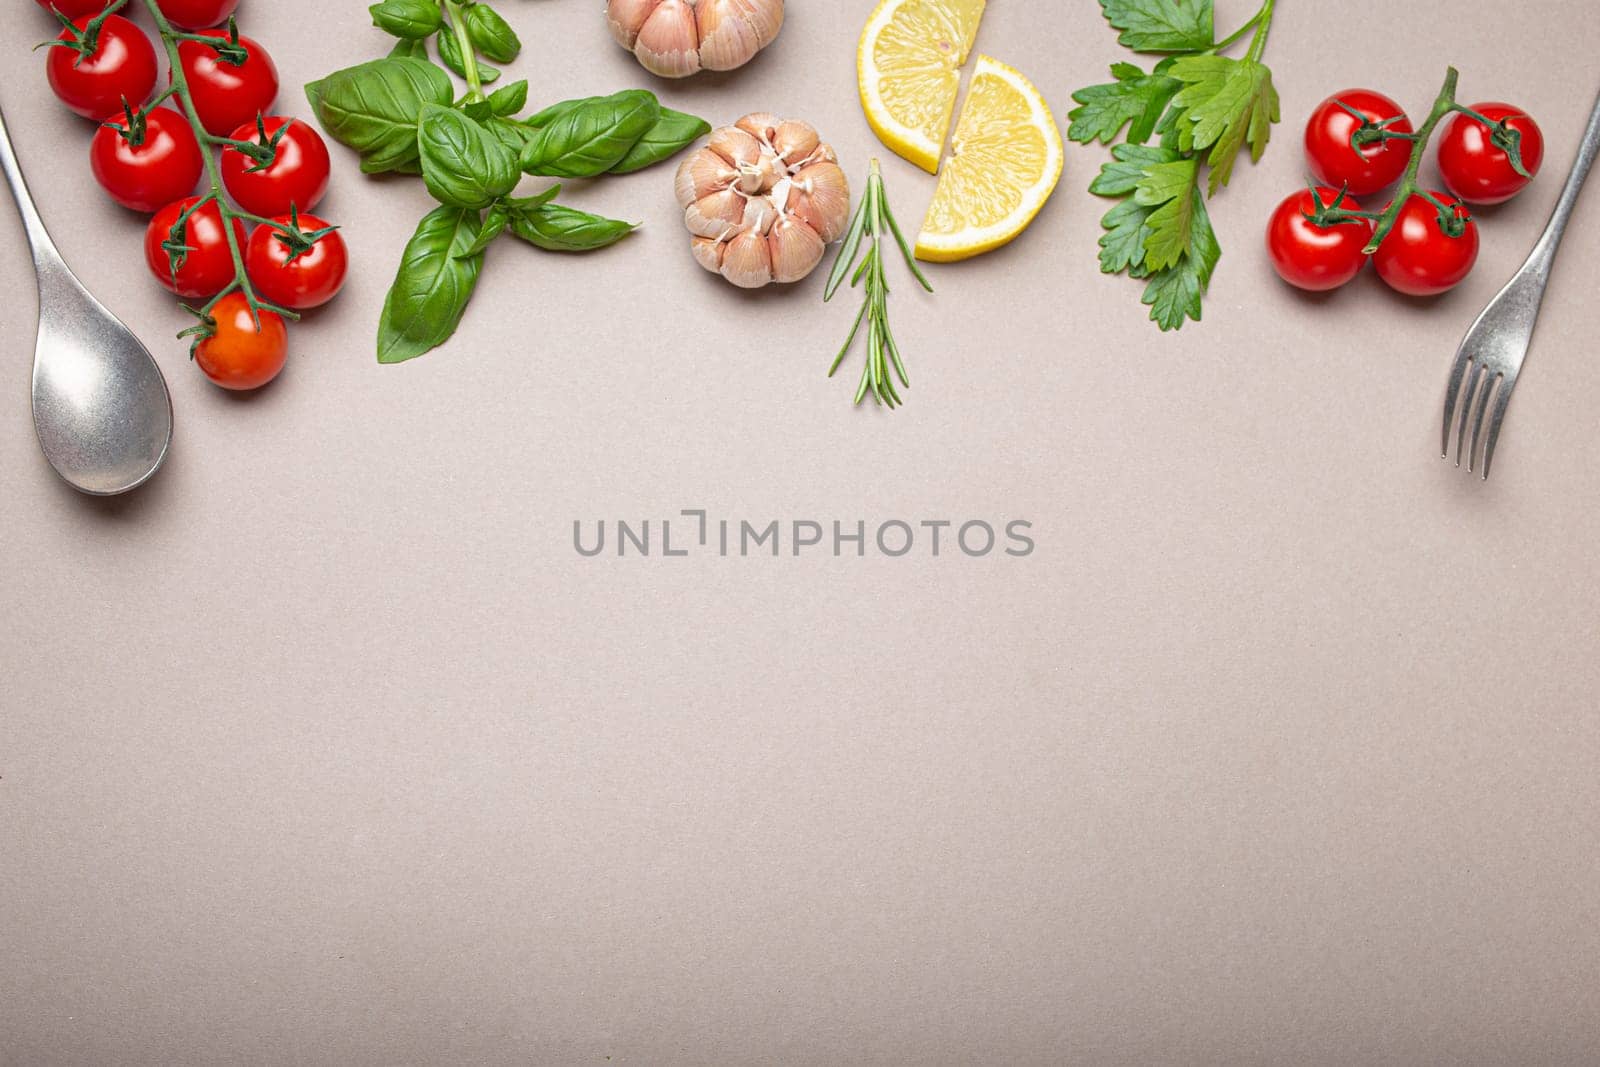 Composition with branch of fresh cherry tomatoes, herbs, garlic cloves, lemon wedges, kitchen spoon and fork on minimalistic grey clean background, overhead shot with copy space by its_al_dente